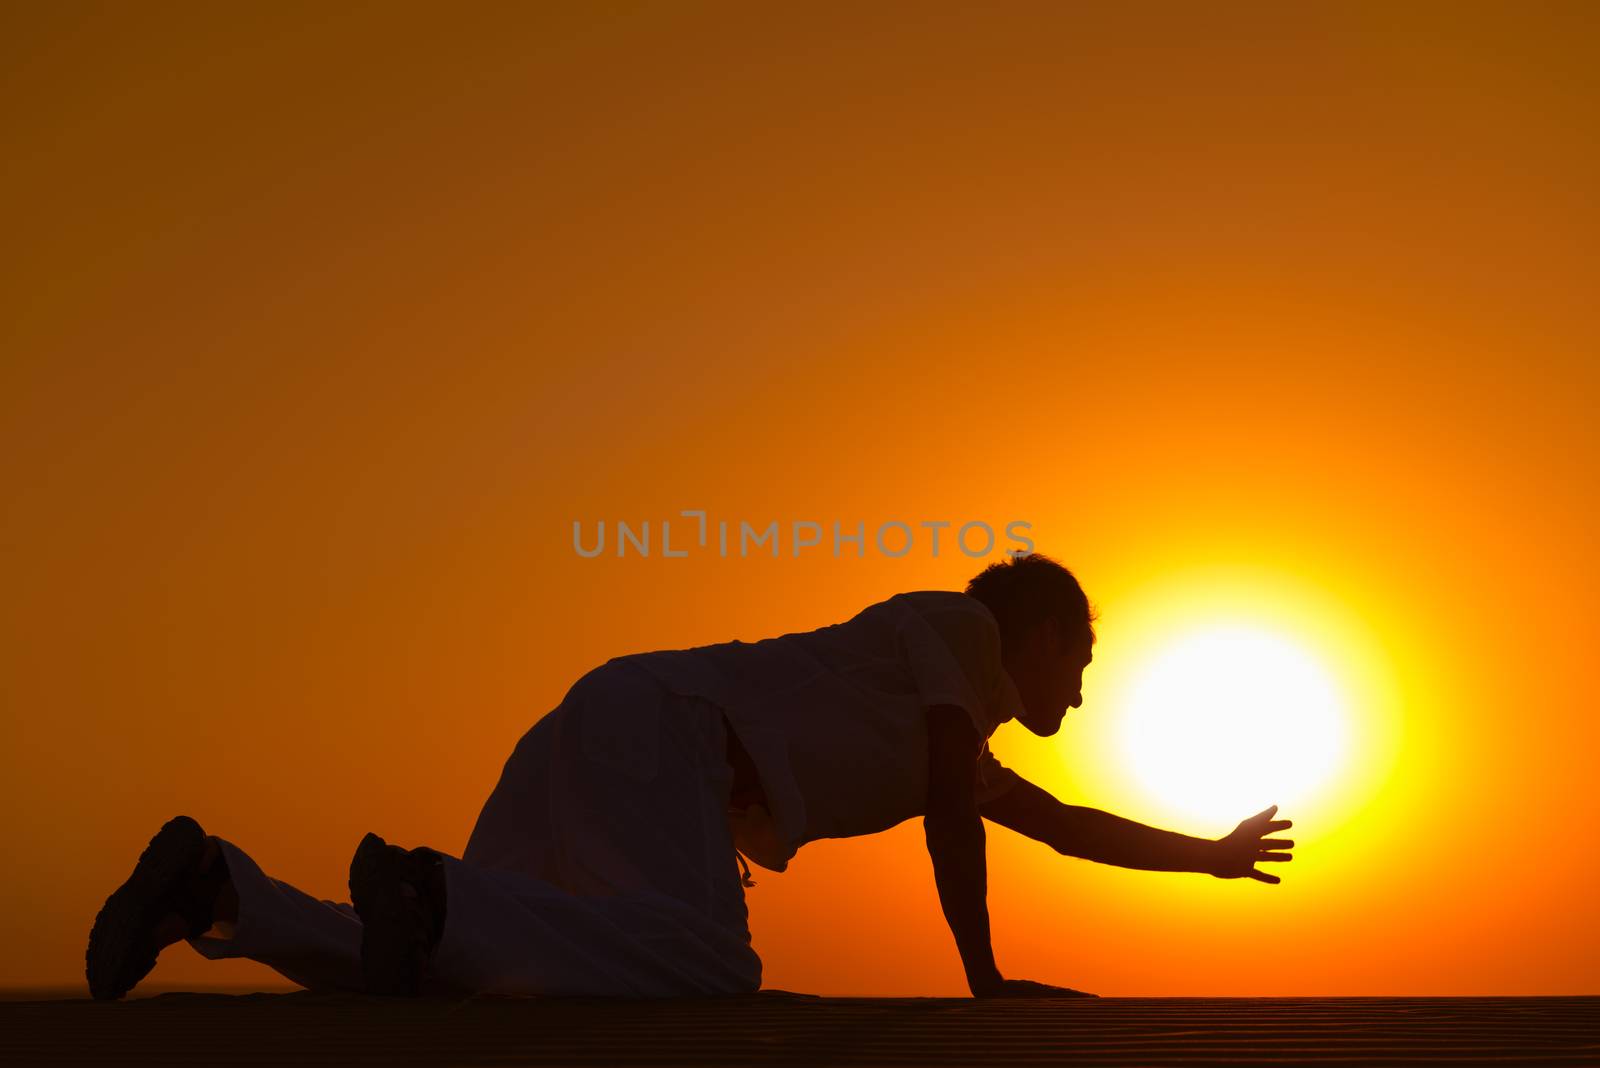 Tired and weaken man on all fours reached his hand to gold sunset sun disk to pray for help